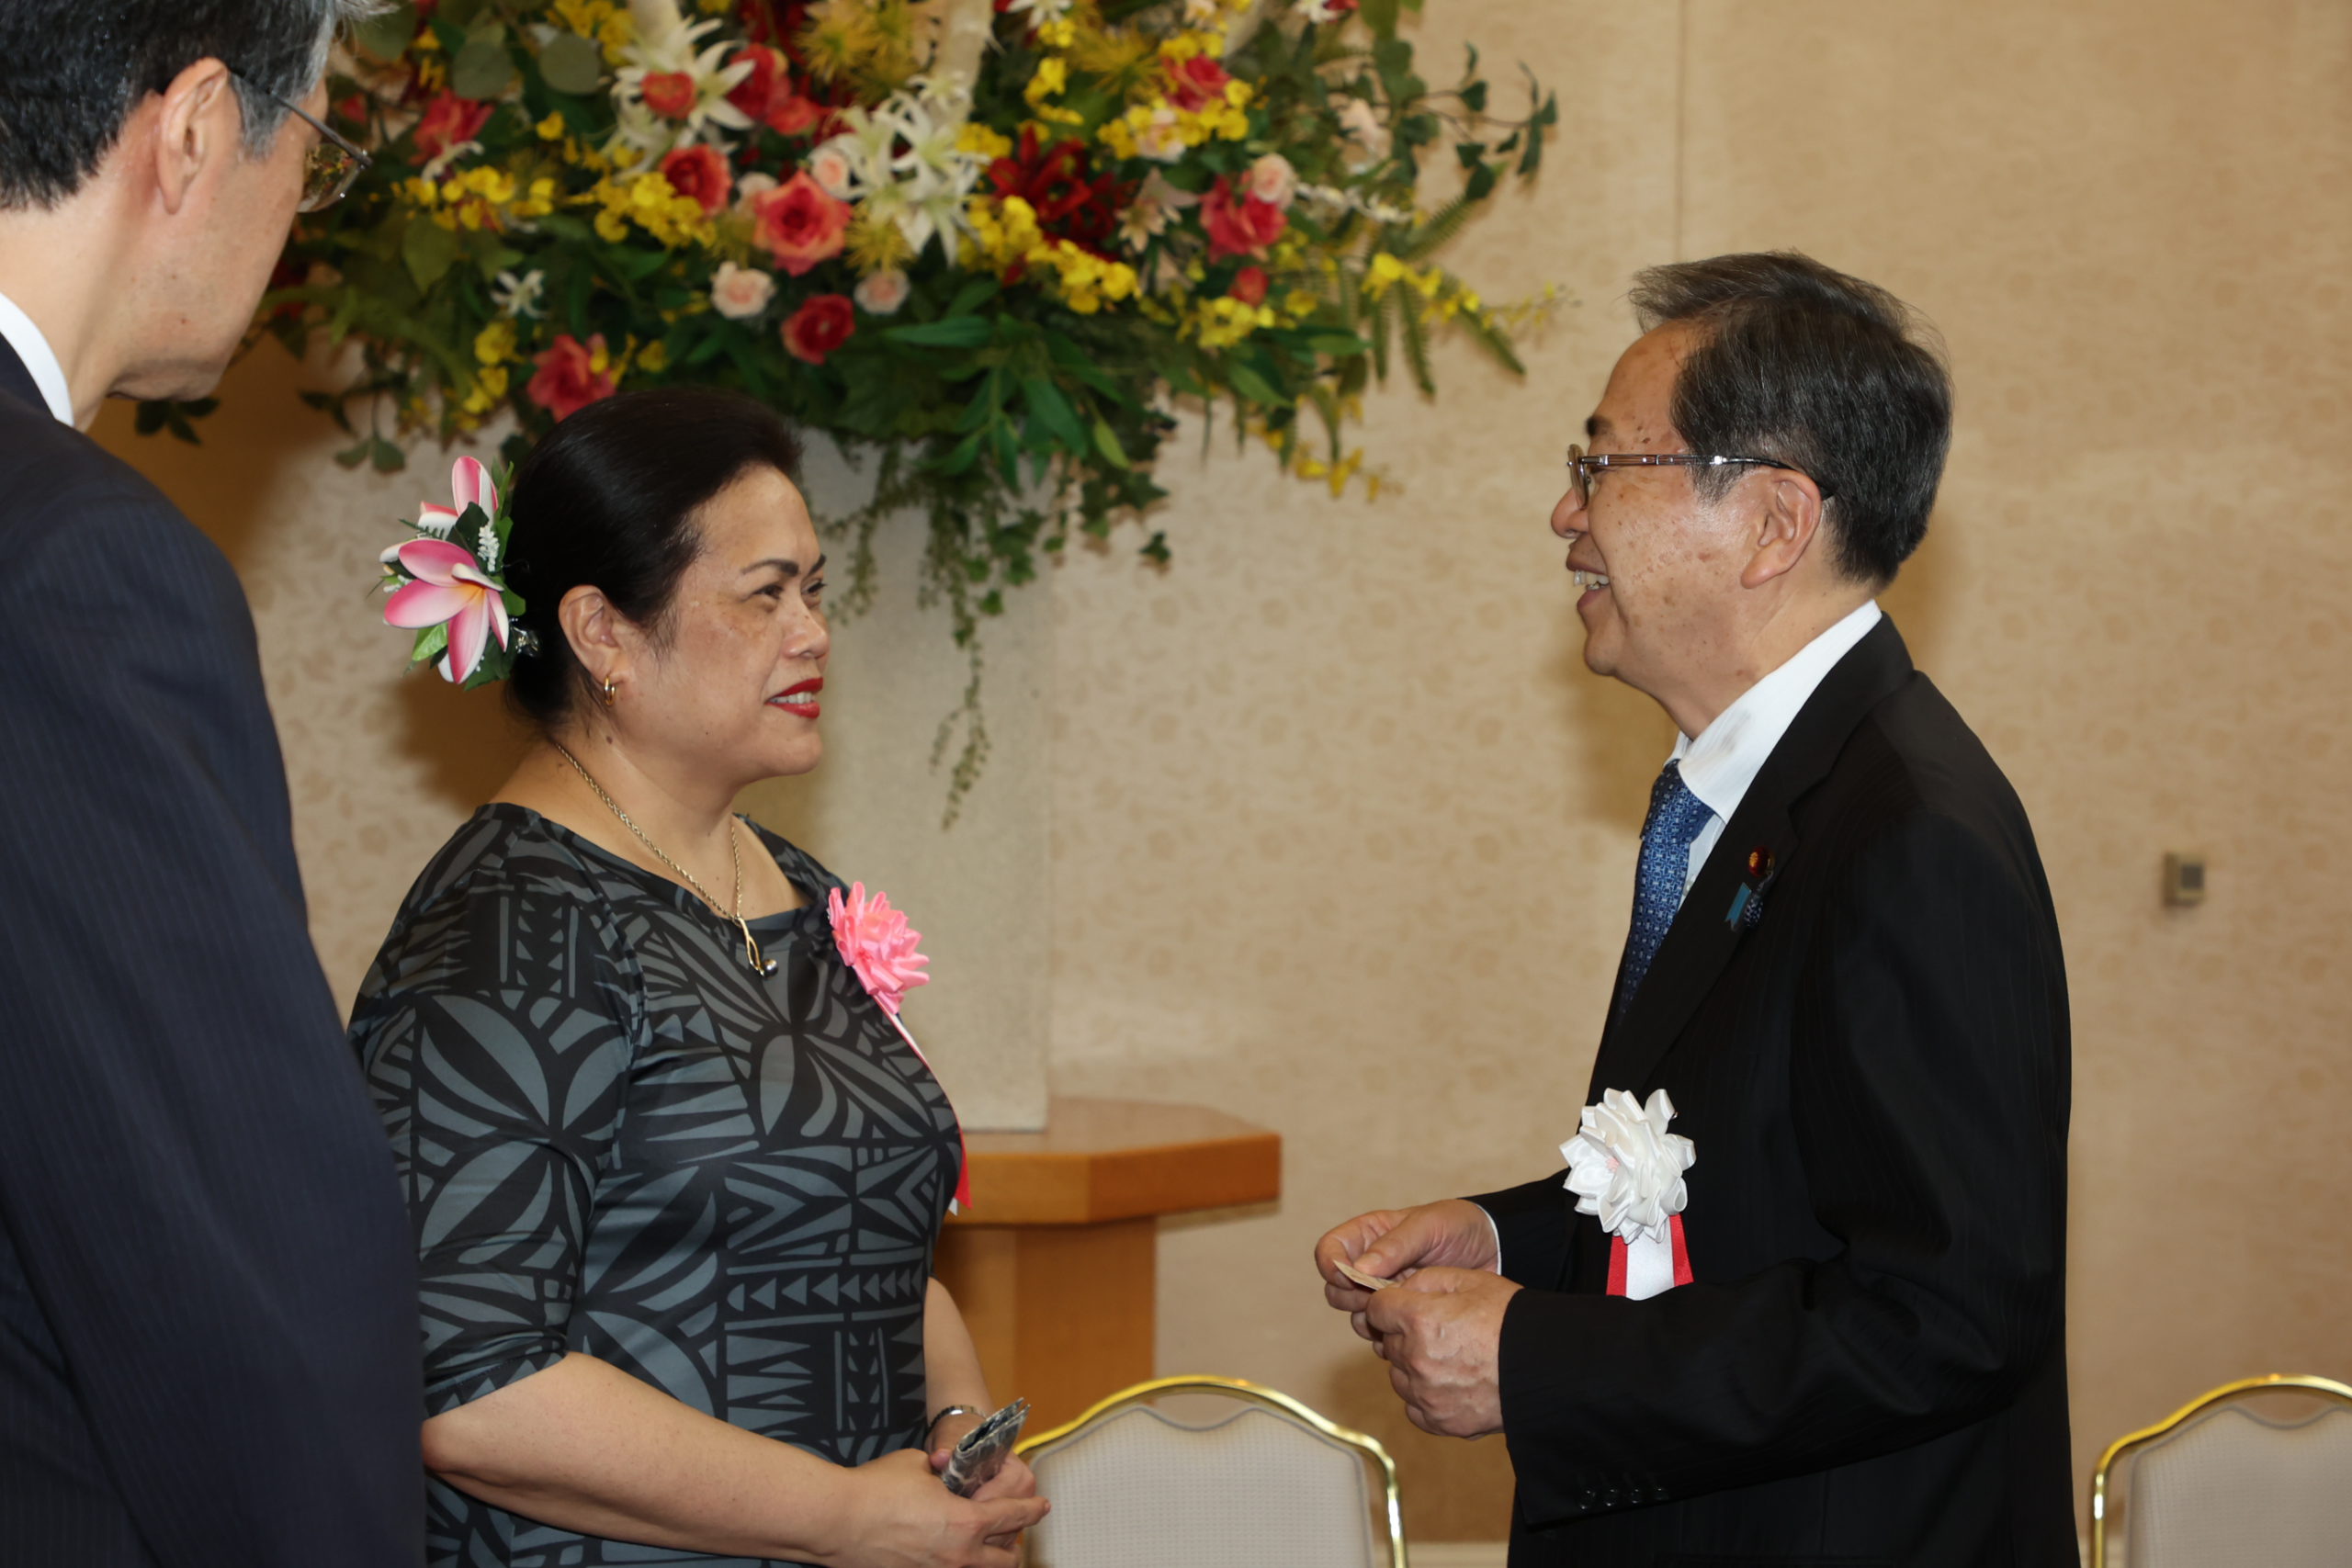 Ambassador Sila exchanges greetings with Hon. Saito Tetsuo, Minister of Land, Infrastructure, Transport and Tourism